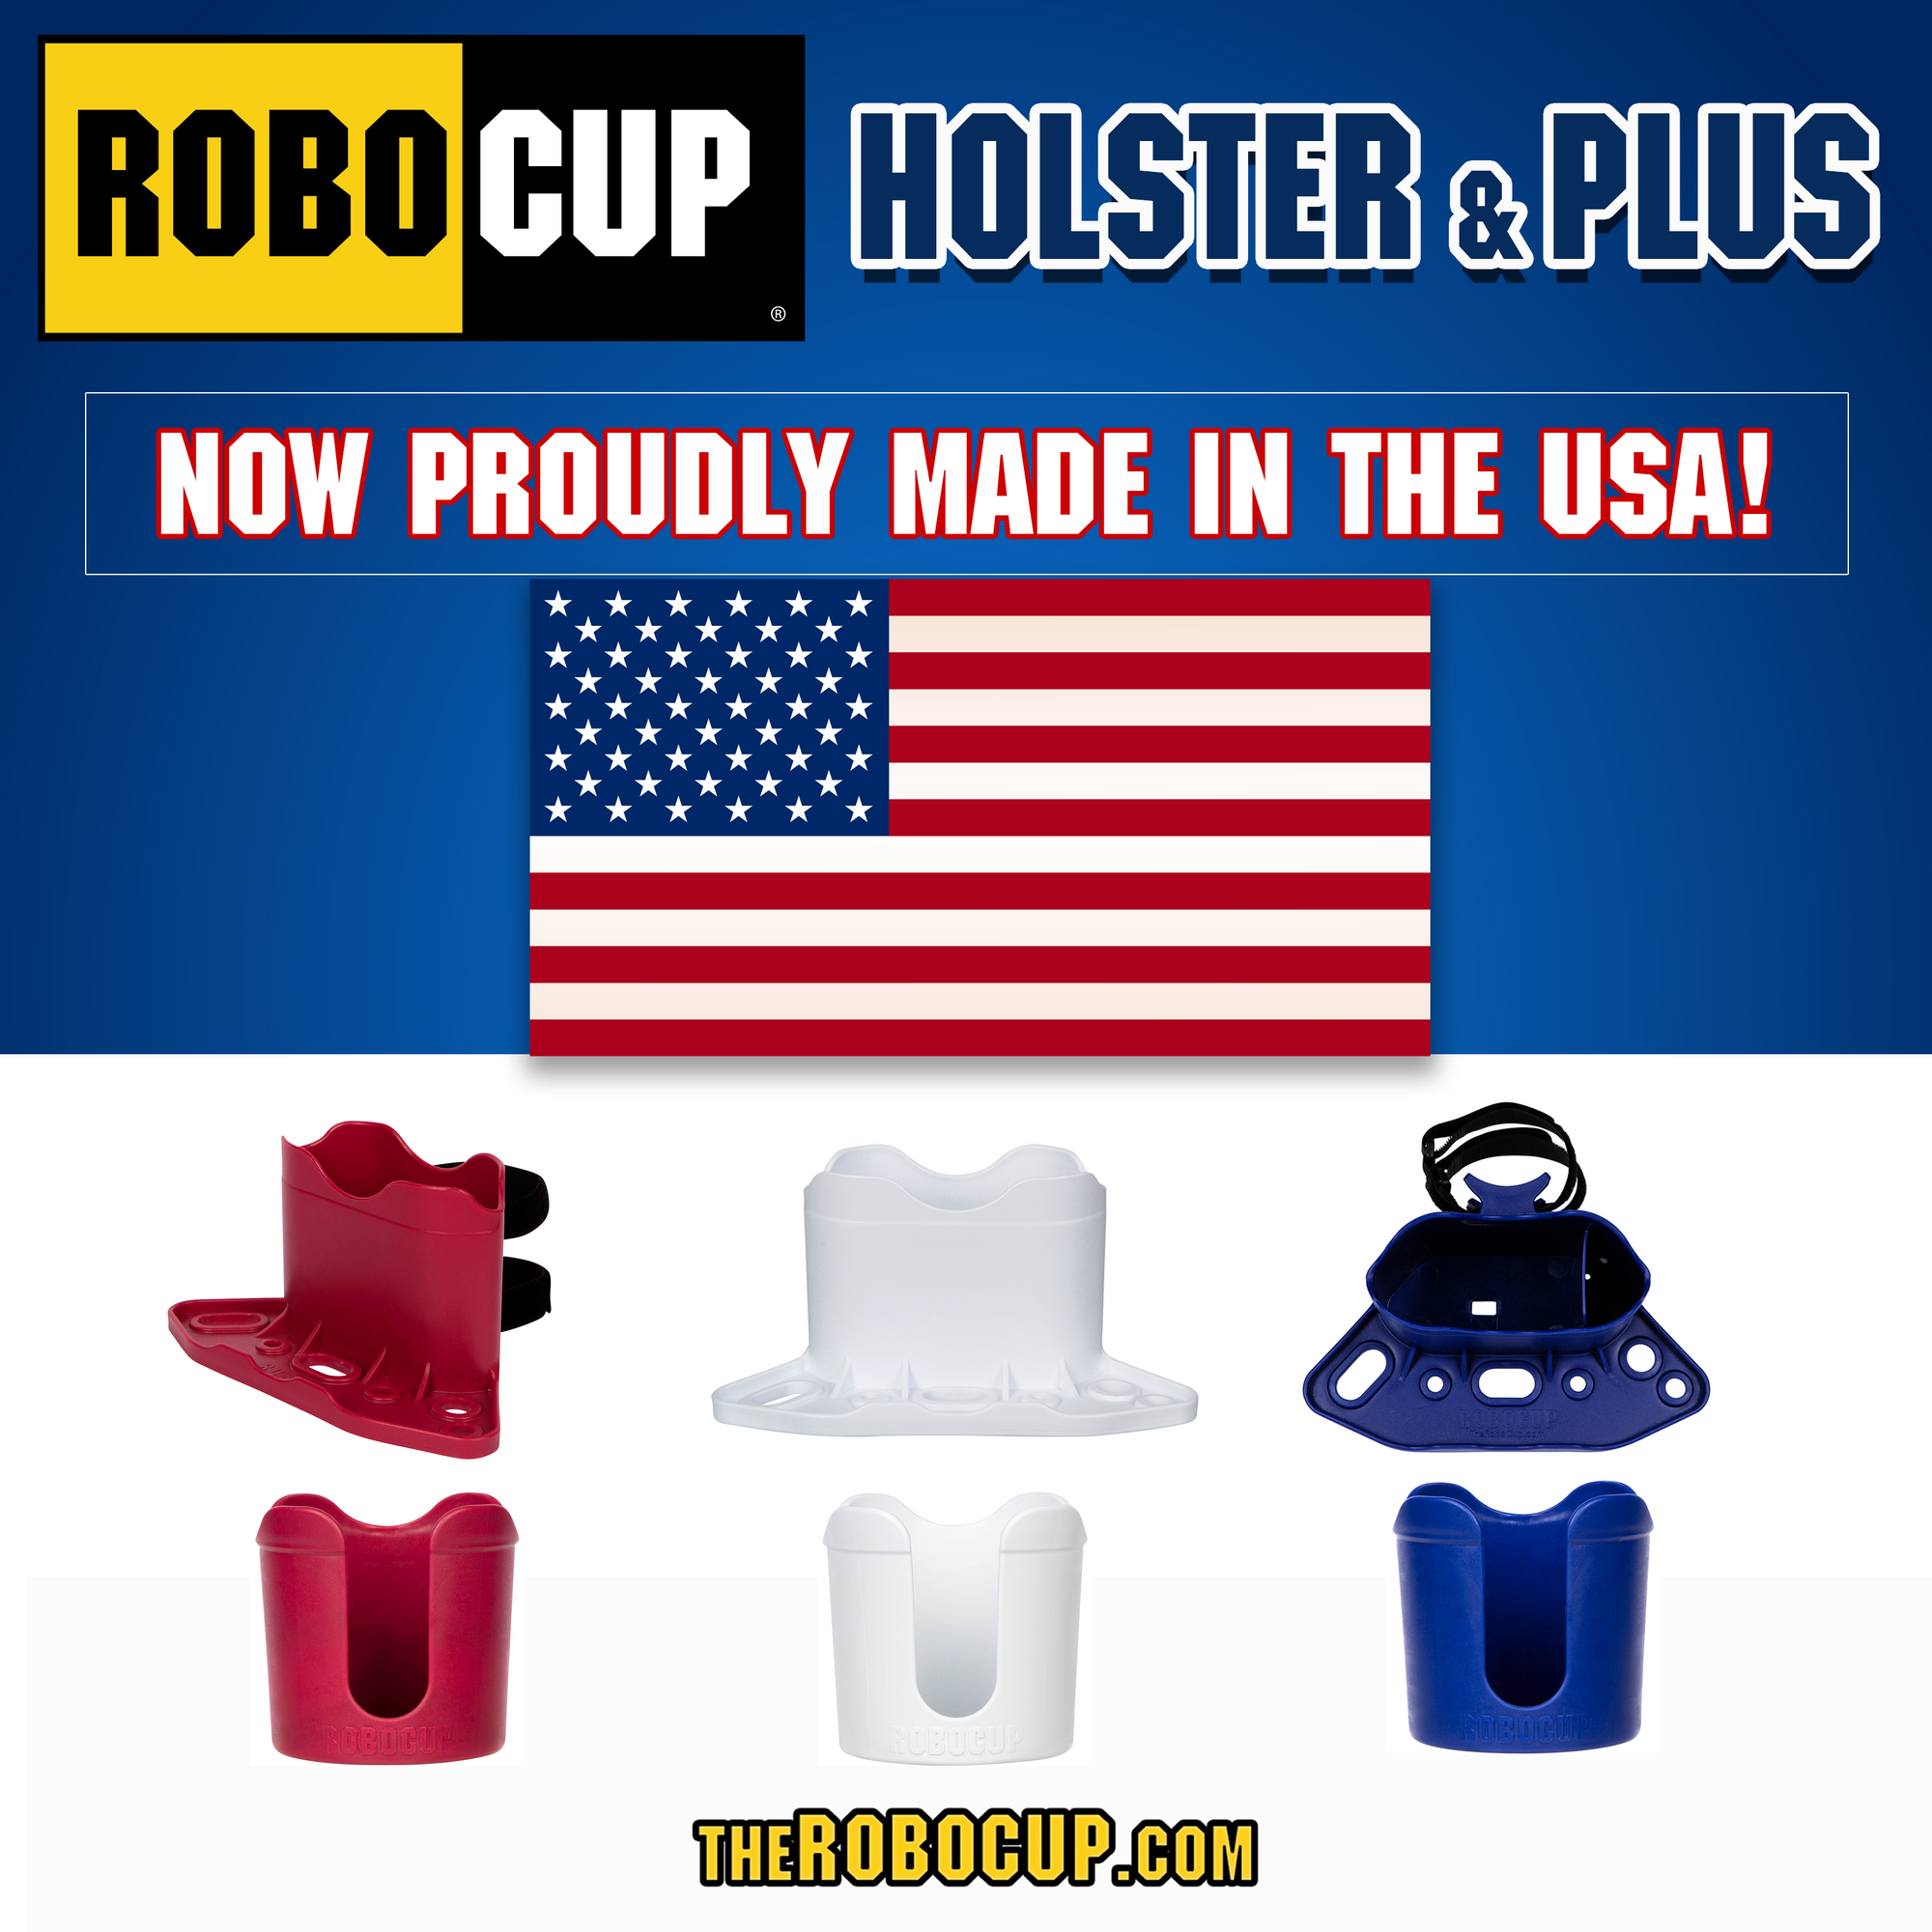 RoboCup Plus and Holster now made in USA!